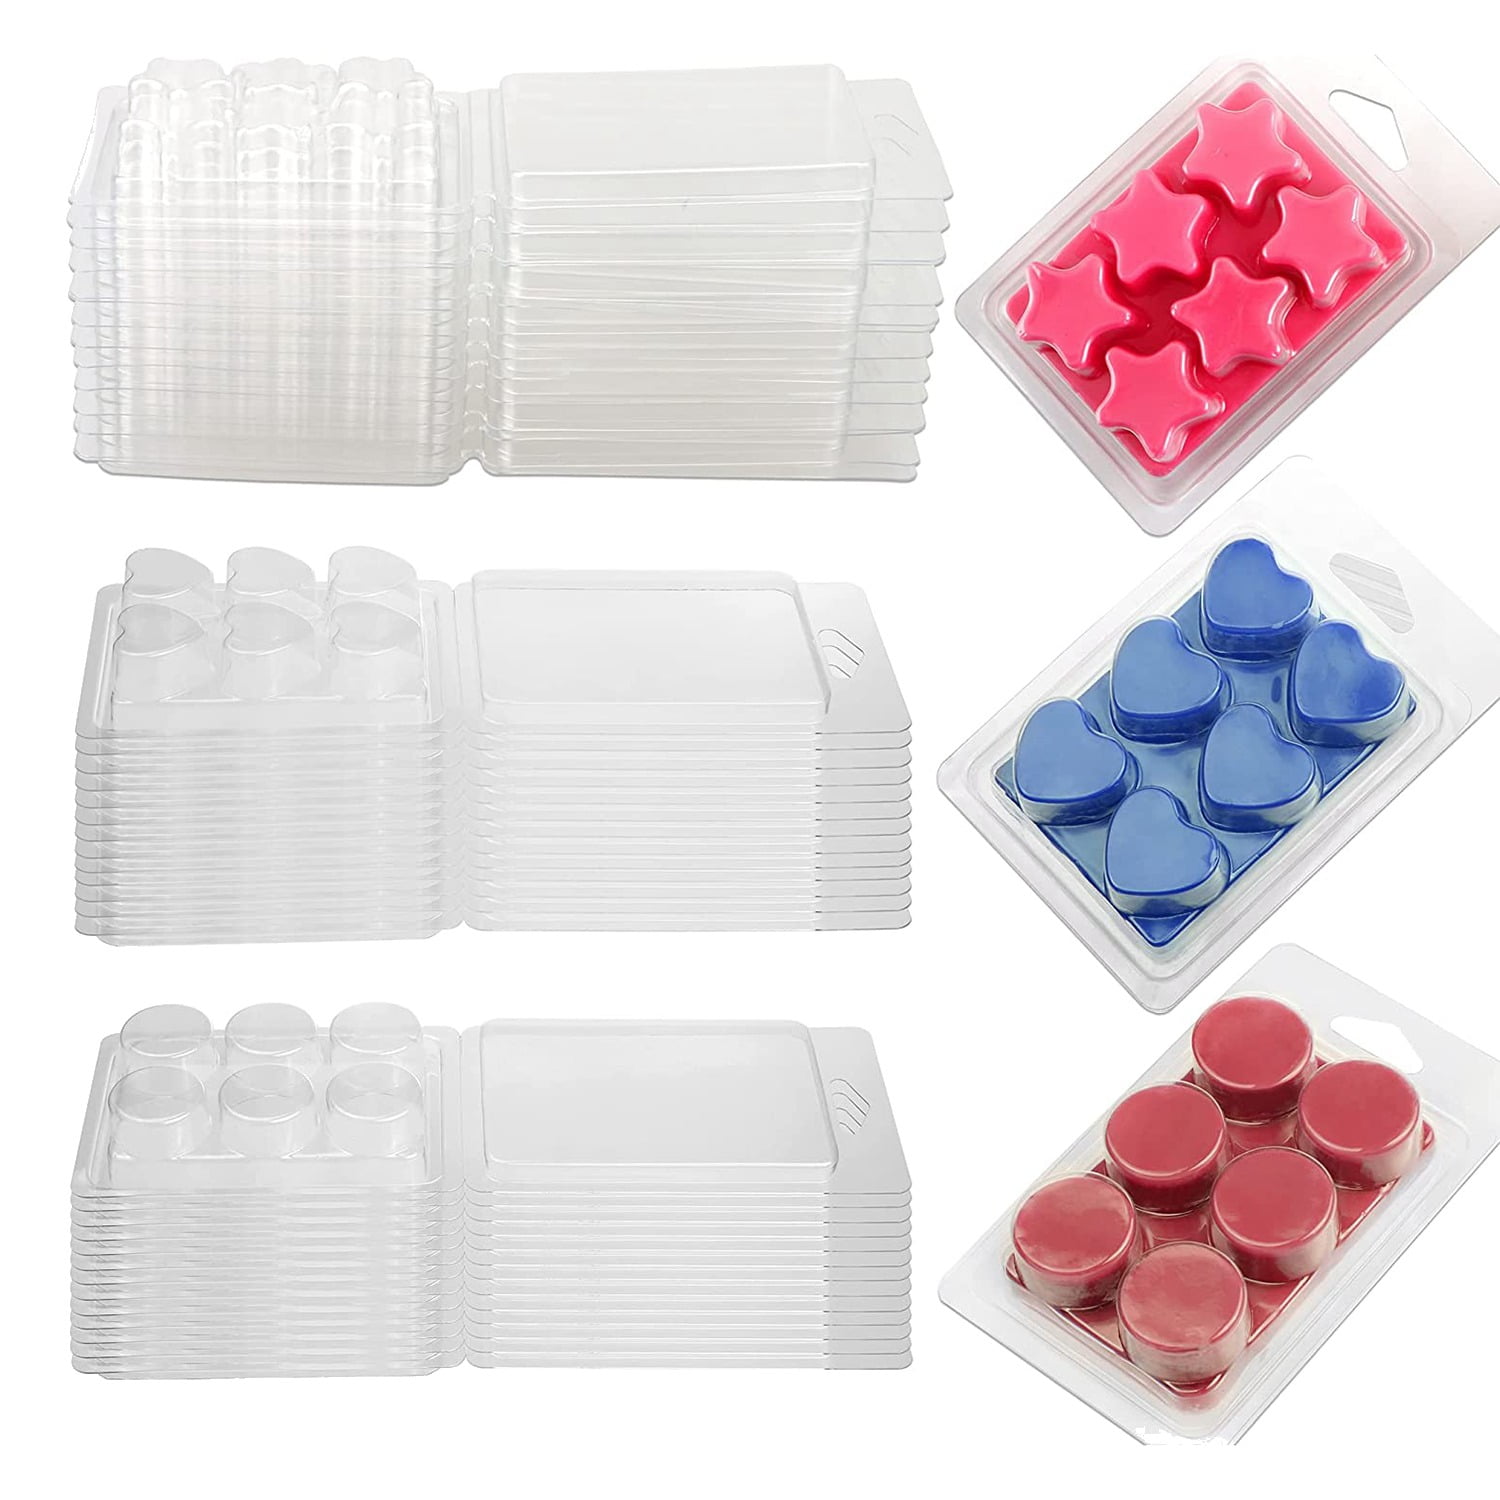 Winyuyby 60 Pack Wax Melt Containers-6 Cavity Clear Empty Plastic Wax Melt  - Clamshells for Tarts Wax Melts. 